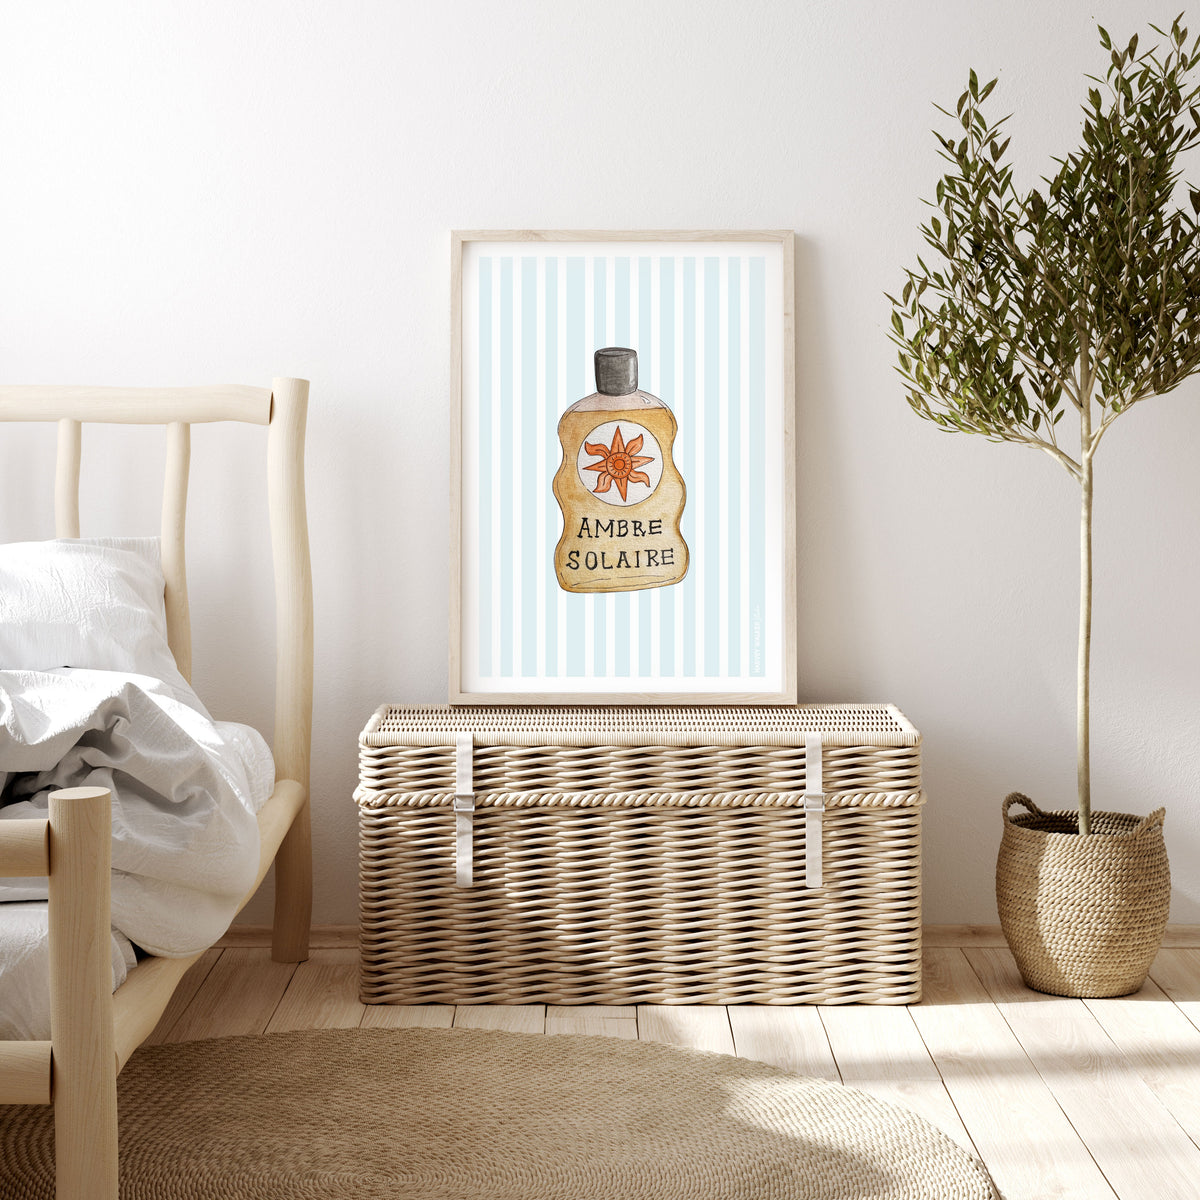 Timber framed fine art print on giclee textured paper. Image of vintage suncream bottle, ambre solaire withe blue and white stripe background. Coastal home with neutral colours, framed in timber white wash frame.